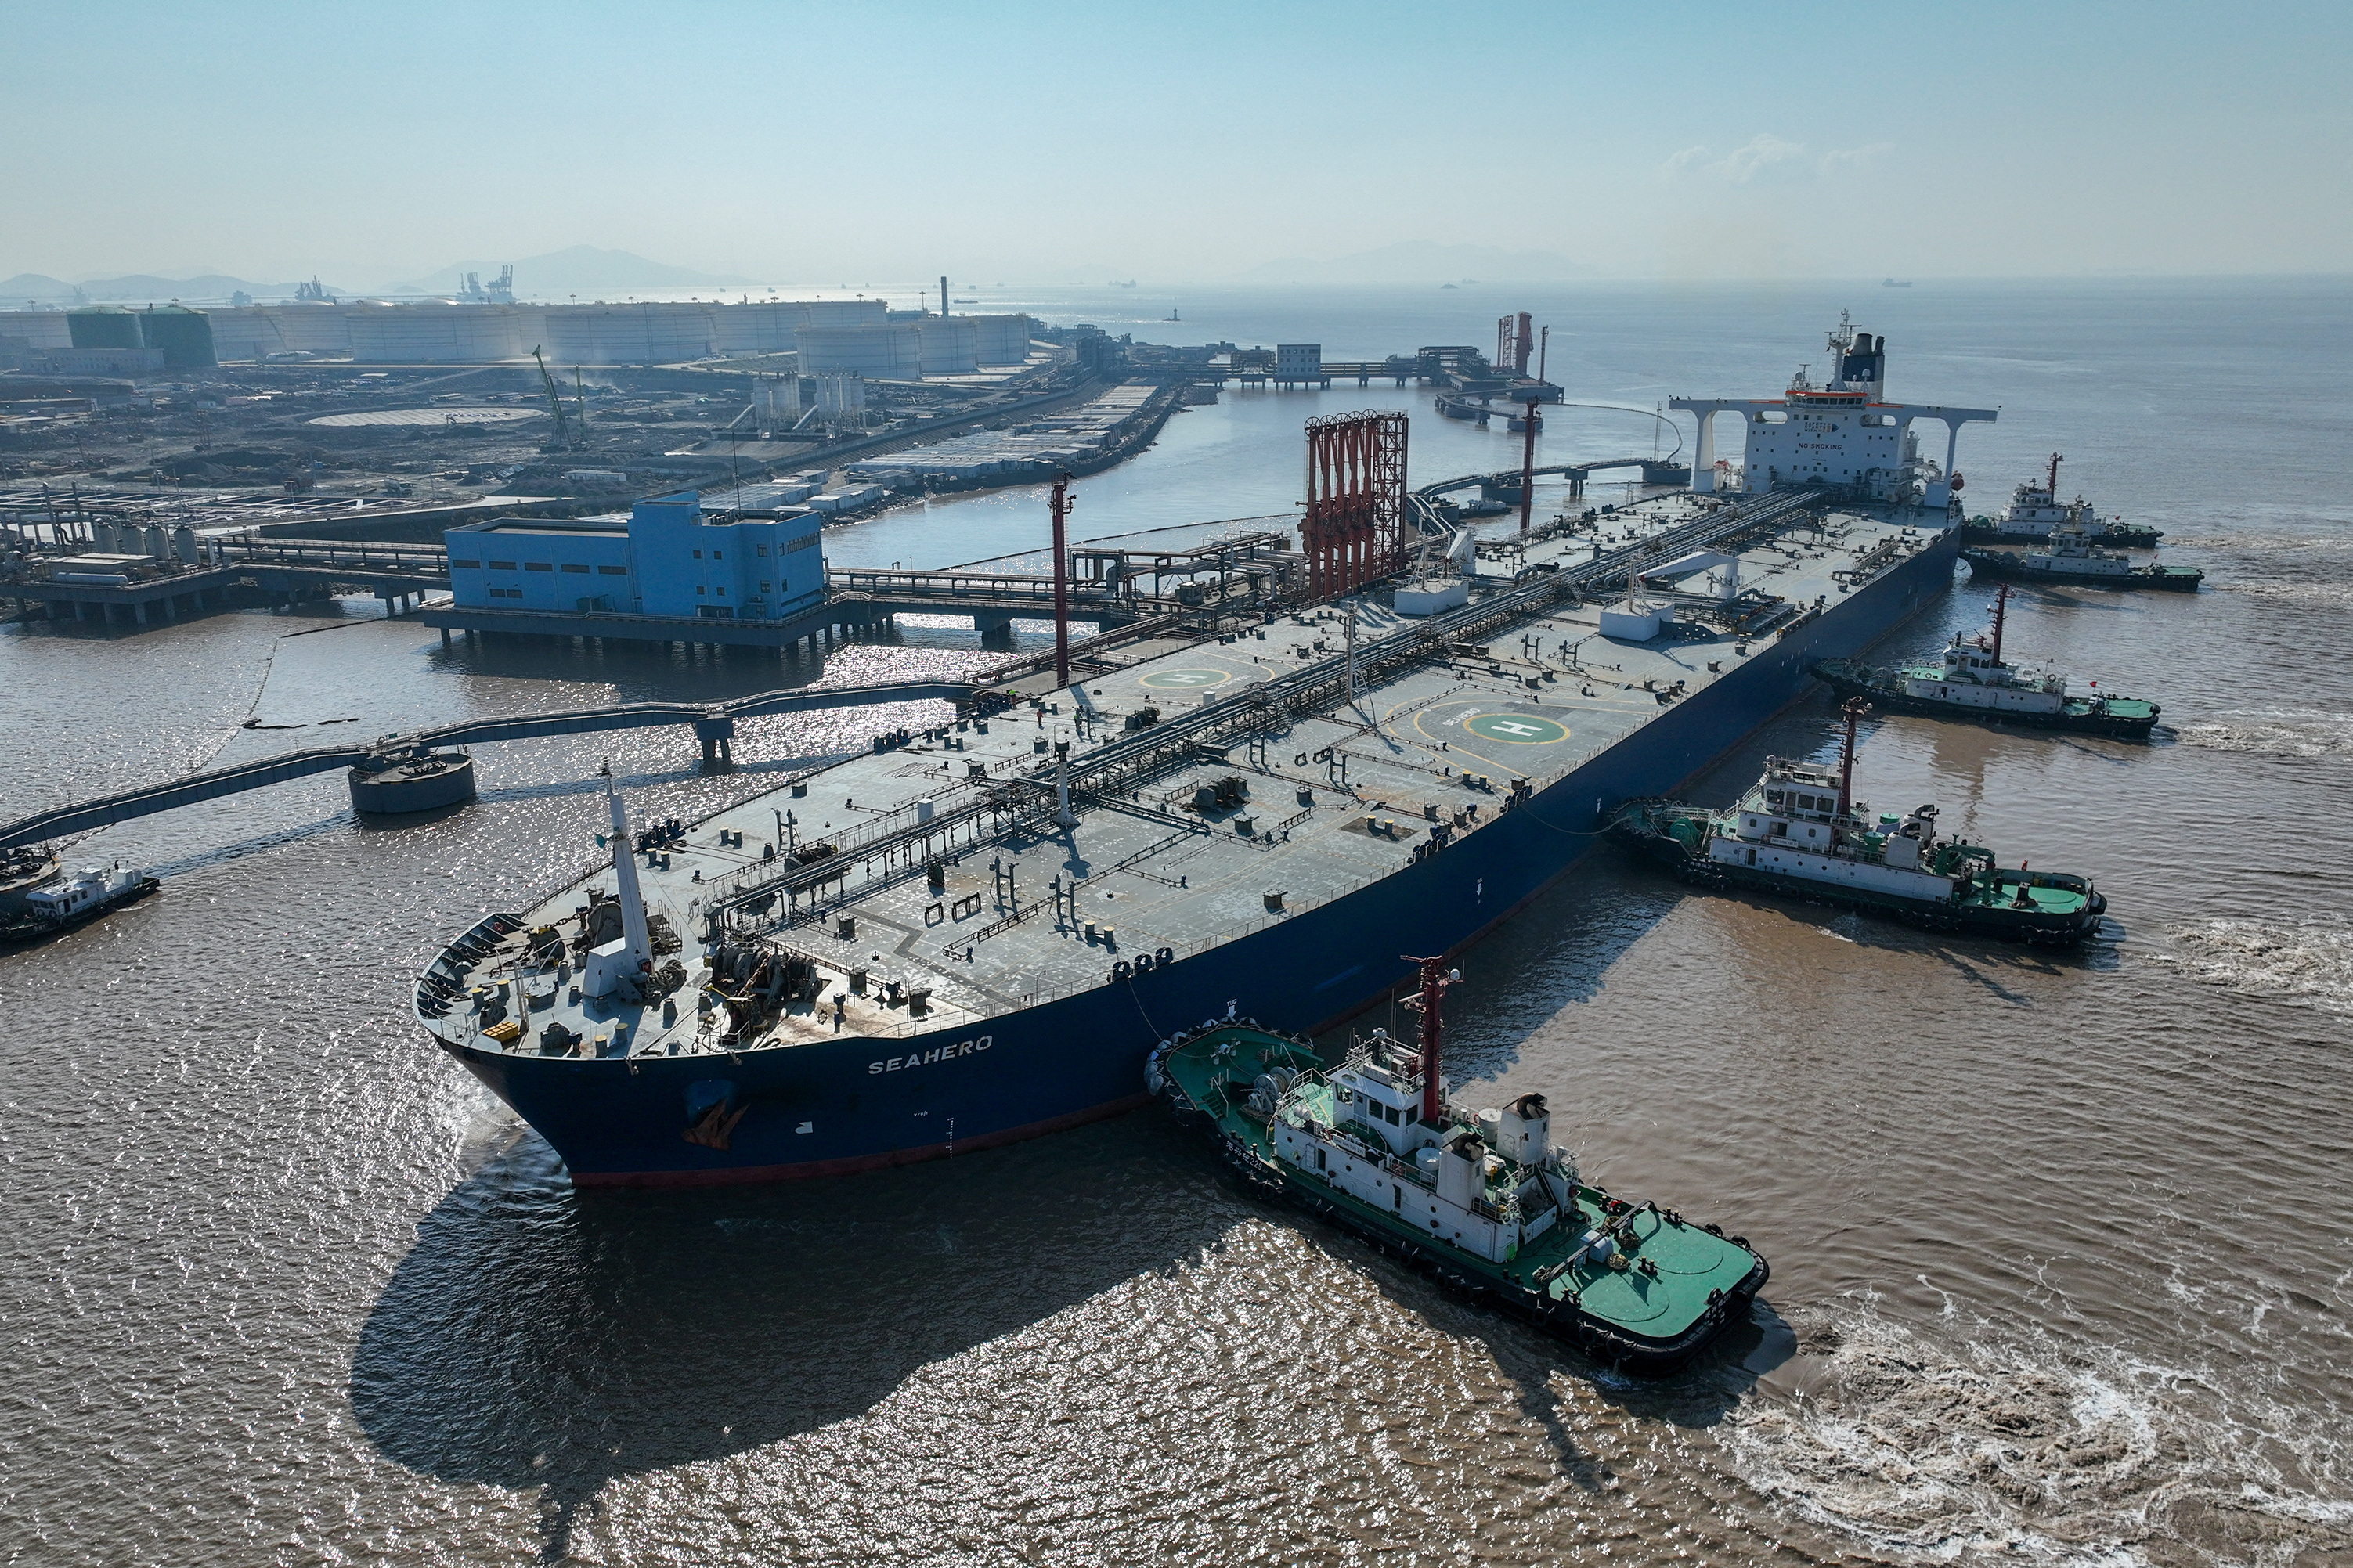 An aerial view shows a crude oil tanker at an oil terminal off Waidiao island in Zhoushan, Zhejiang province, China on January 4, 2023. (China Daily via Reuters)